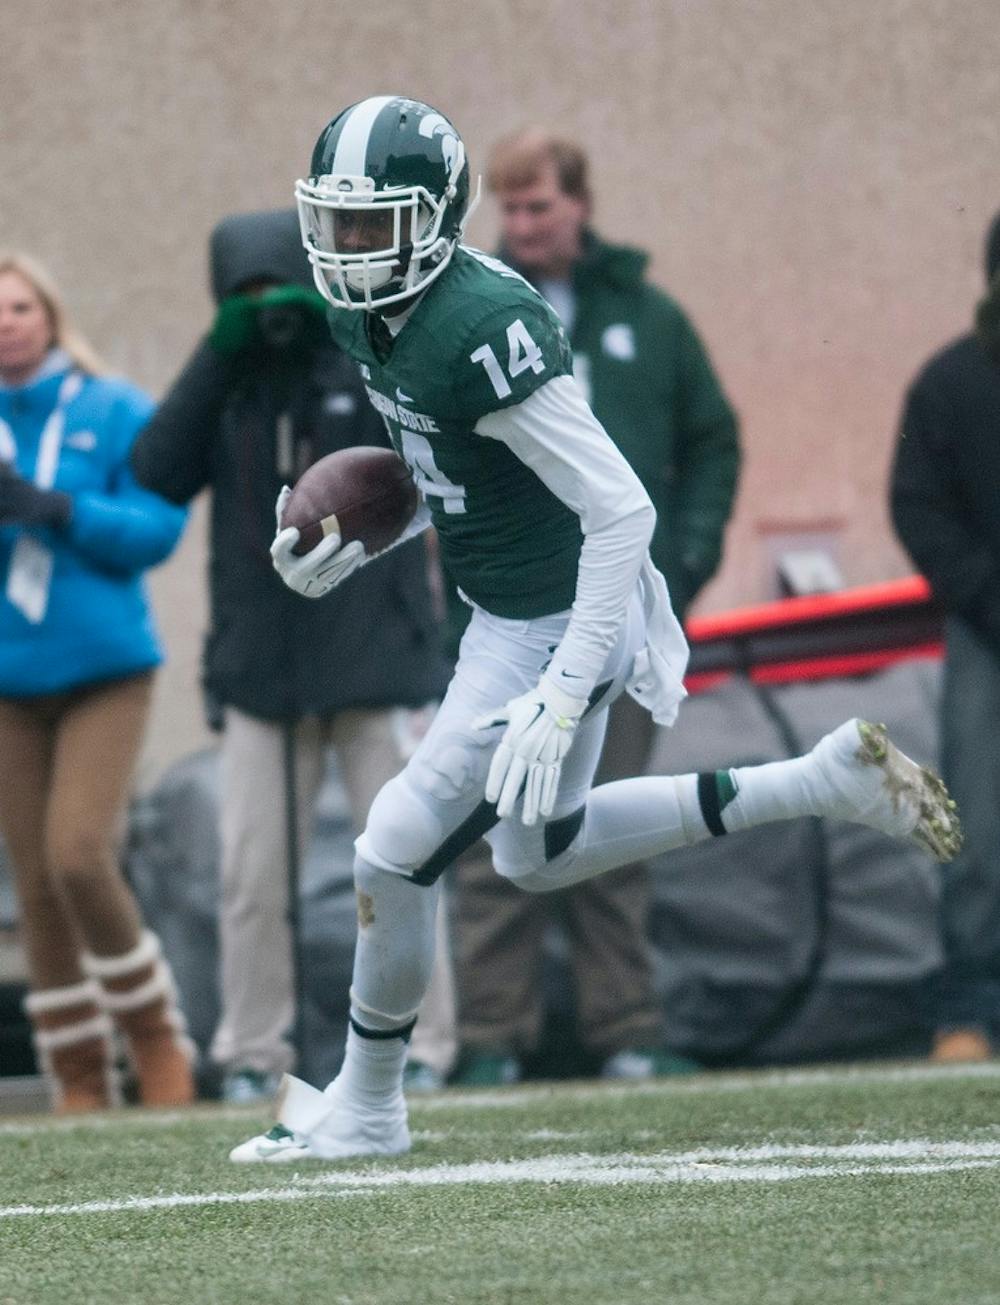 <p>Senior wide receiver Tony Lippett runs the ball into the end zone Nov. 22, 2014, during the game against Rutgers at the Spartan Stadium. The Spartans defeated the Scarlet Knights, 45-3. Aerika Williams/The State News </p>